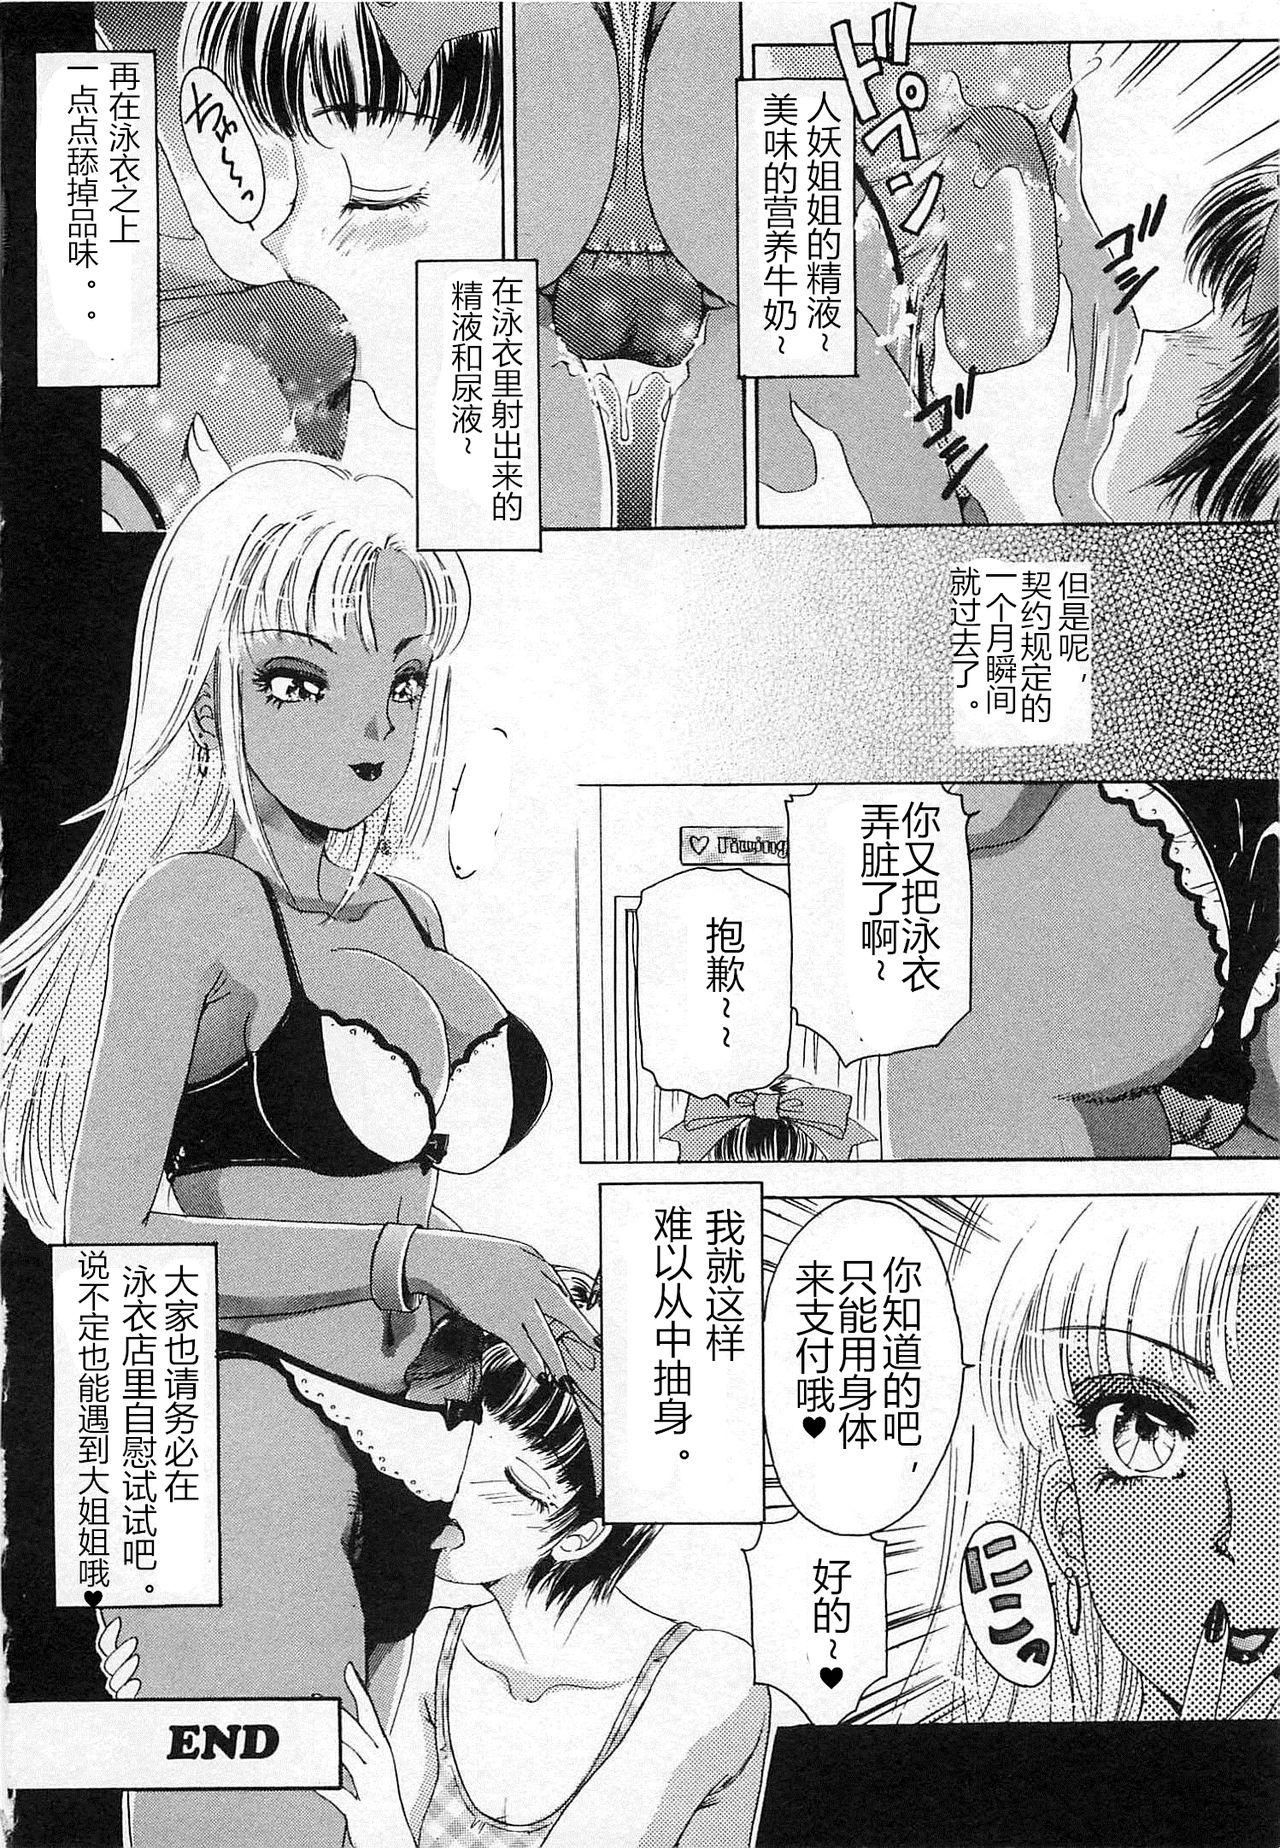 Hd Porn T.S. I LOVE YOU chapter 09 Highschool - Page 9